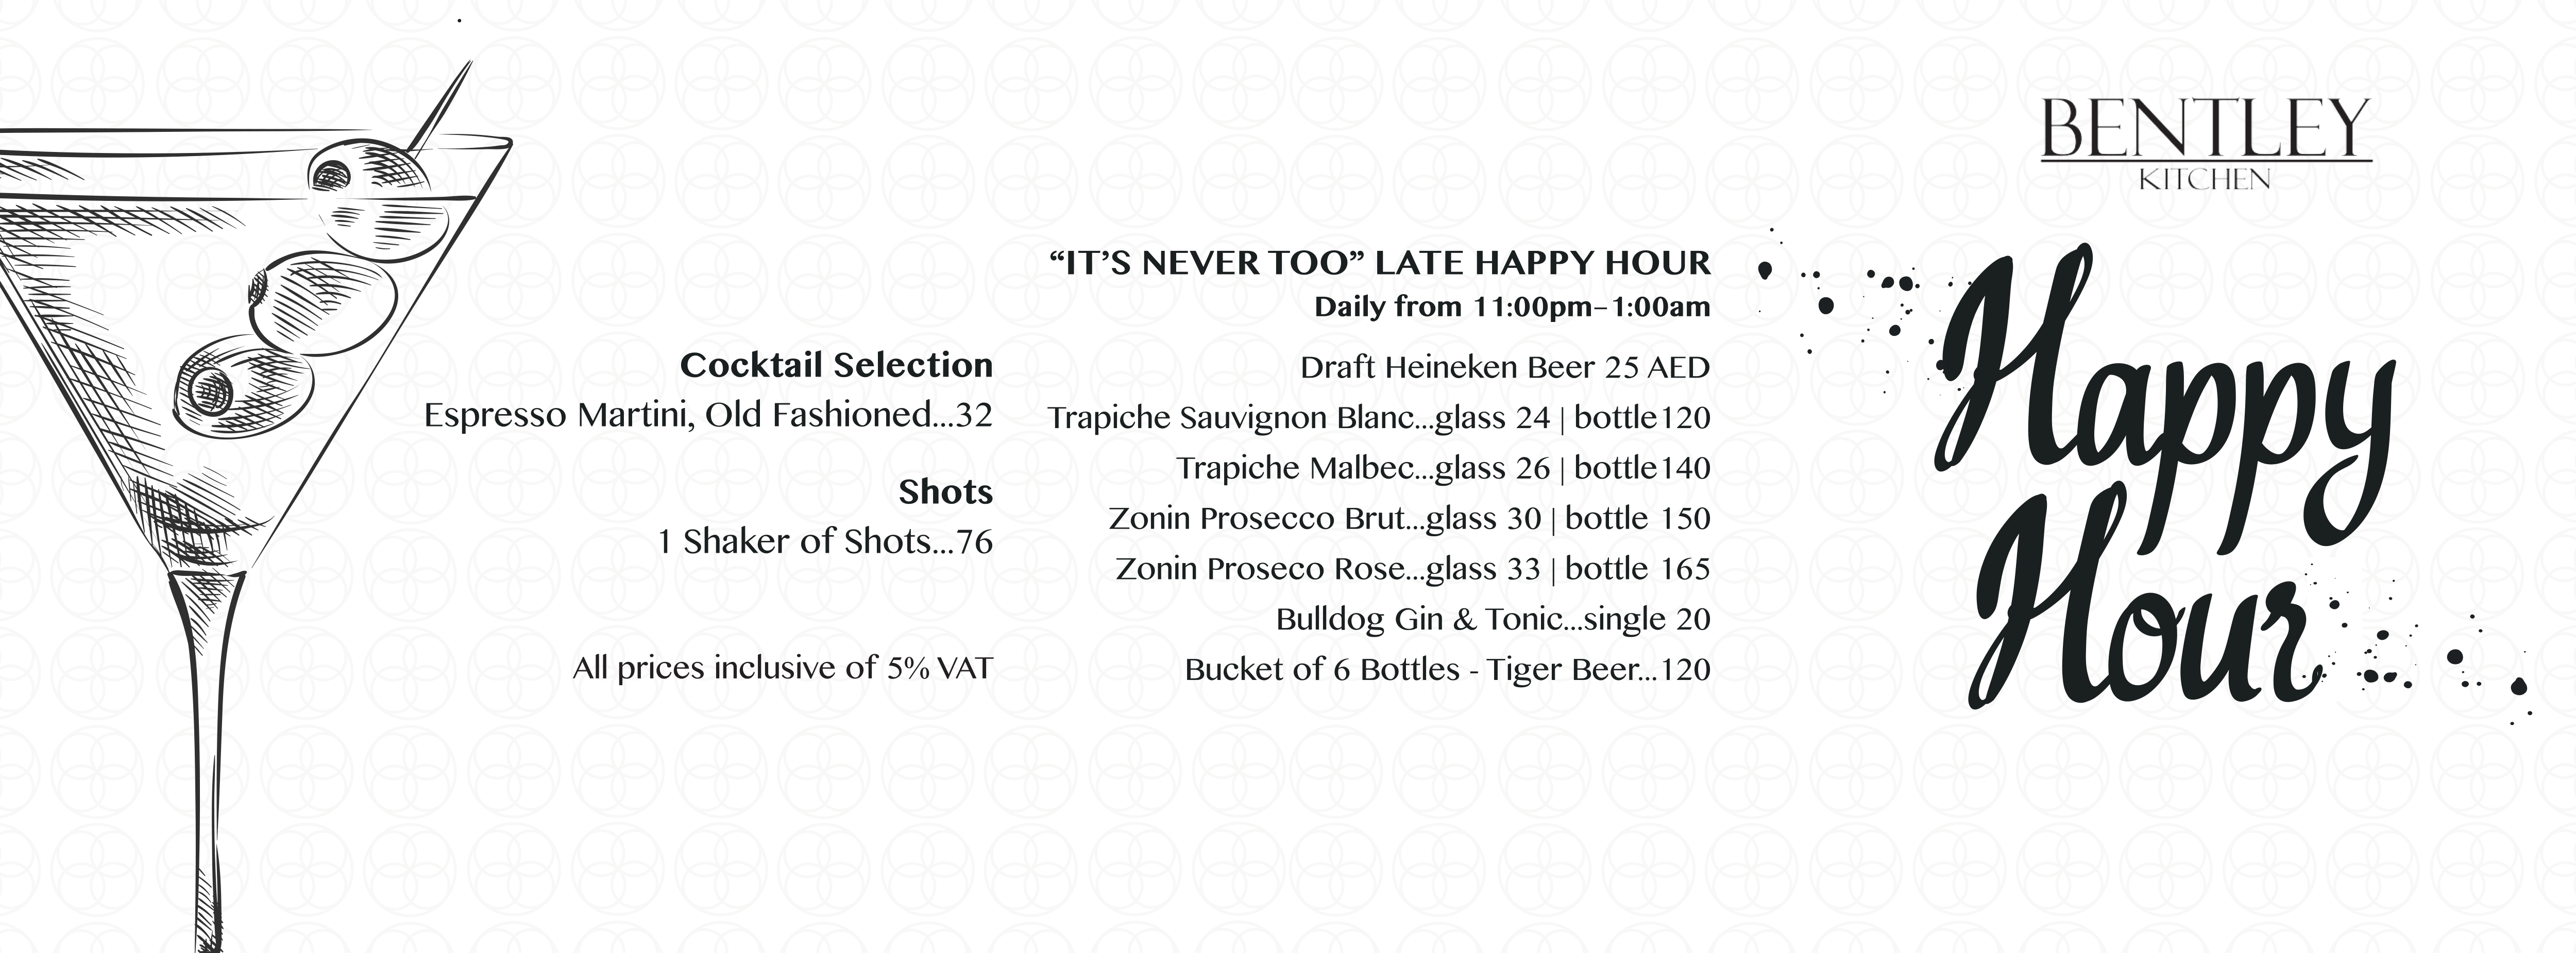 Its Never Too Late Happy Hour Bentley The Capital List